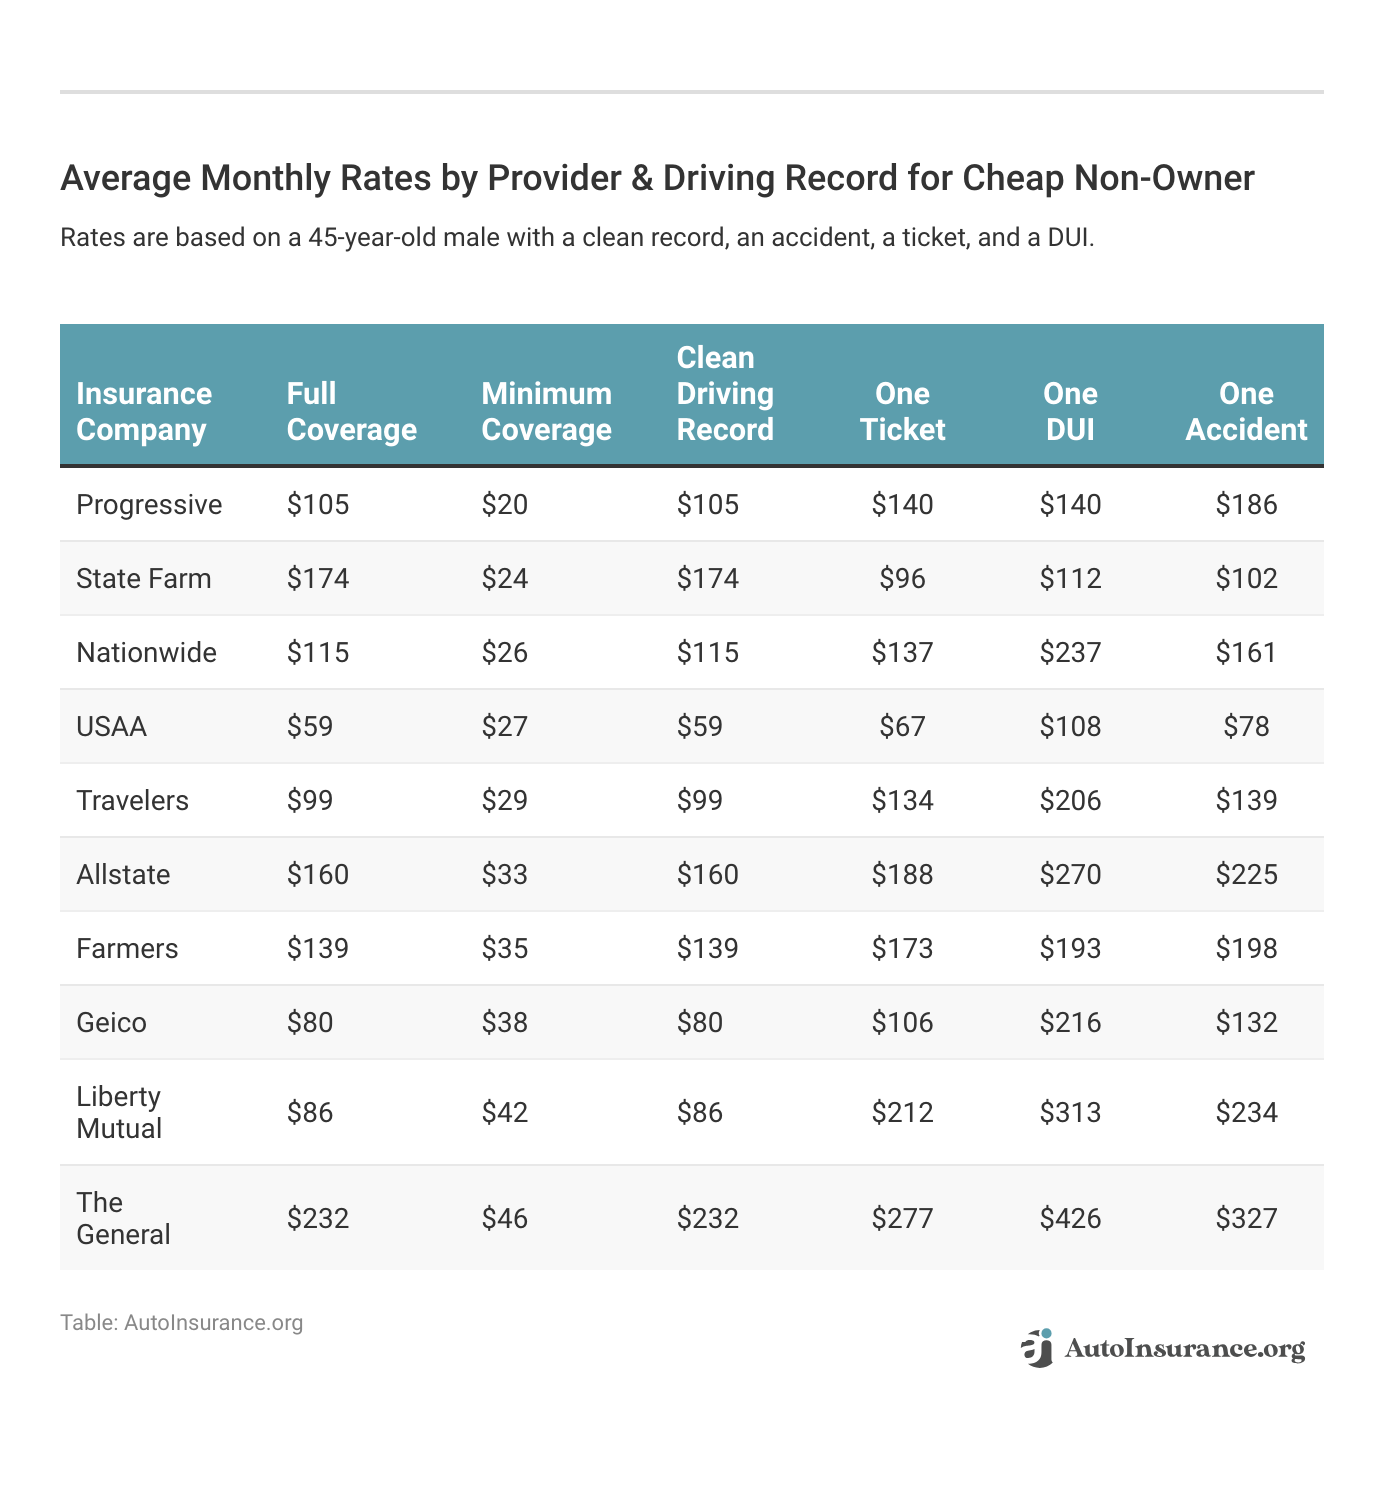 <h3>Average Monthly Rates by Provider & Driving Record for Cheap Non-Owner</h3>